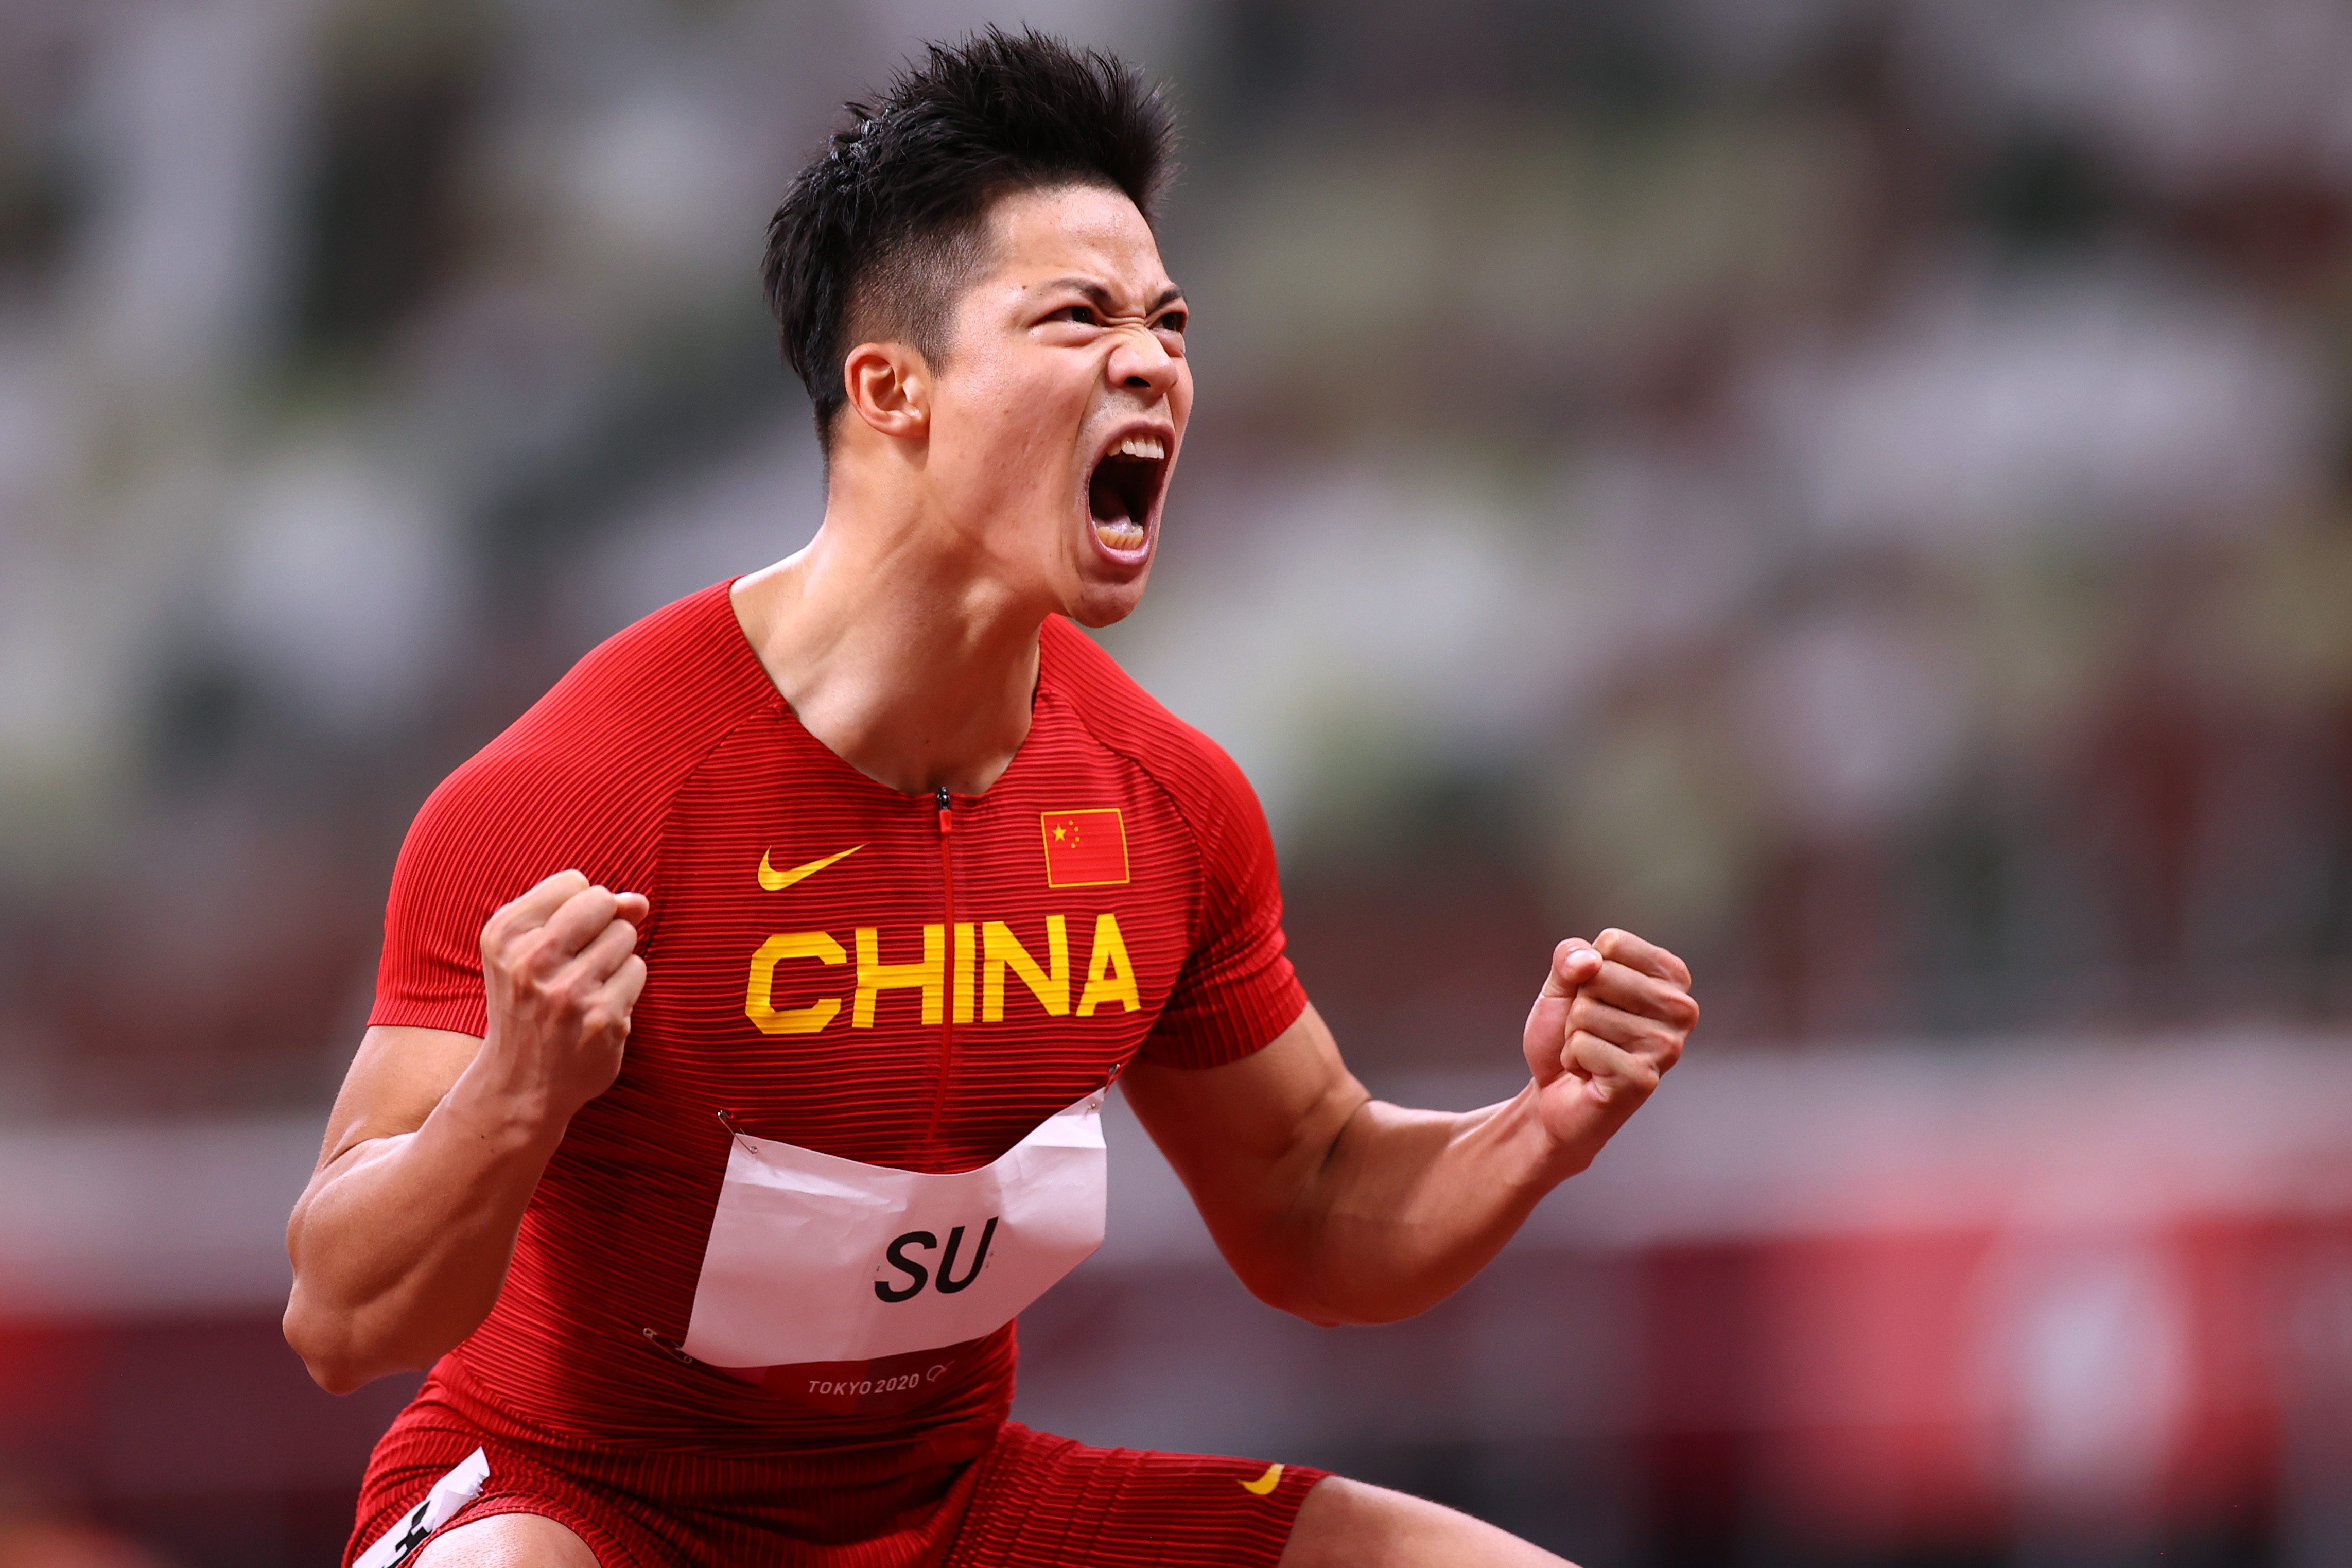 Athletics: China’s Su makes 100m final but Bromell goes out in semis